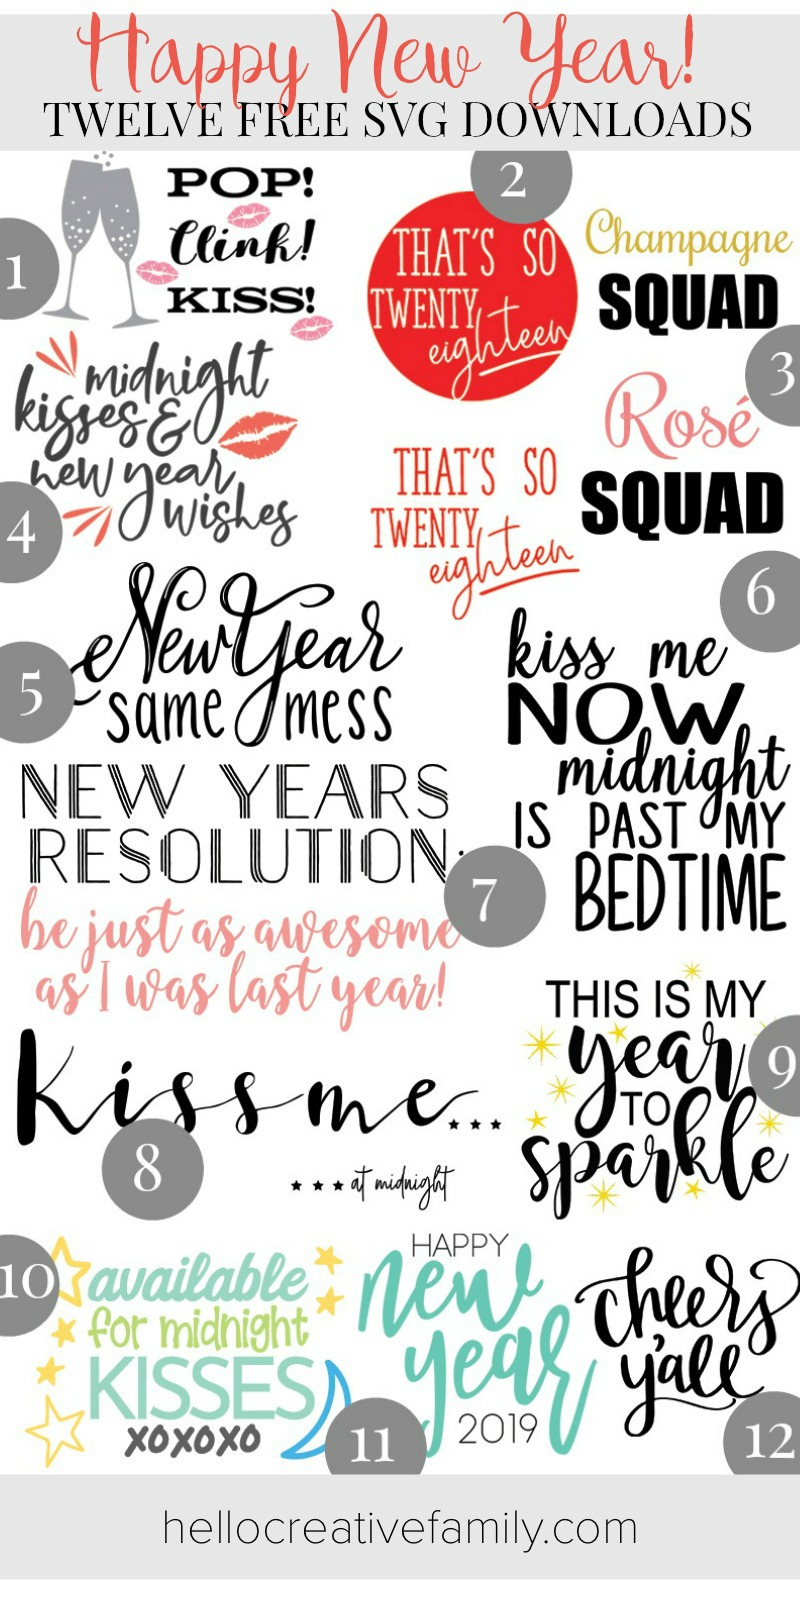 Download 12 Free New Year's Eve SVG Files Including Rosé Squad and ...